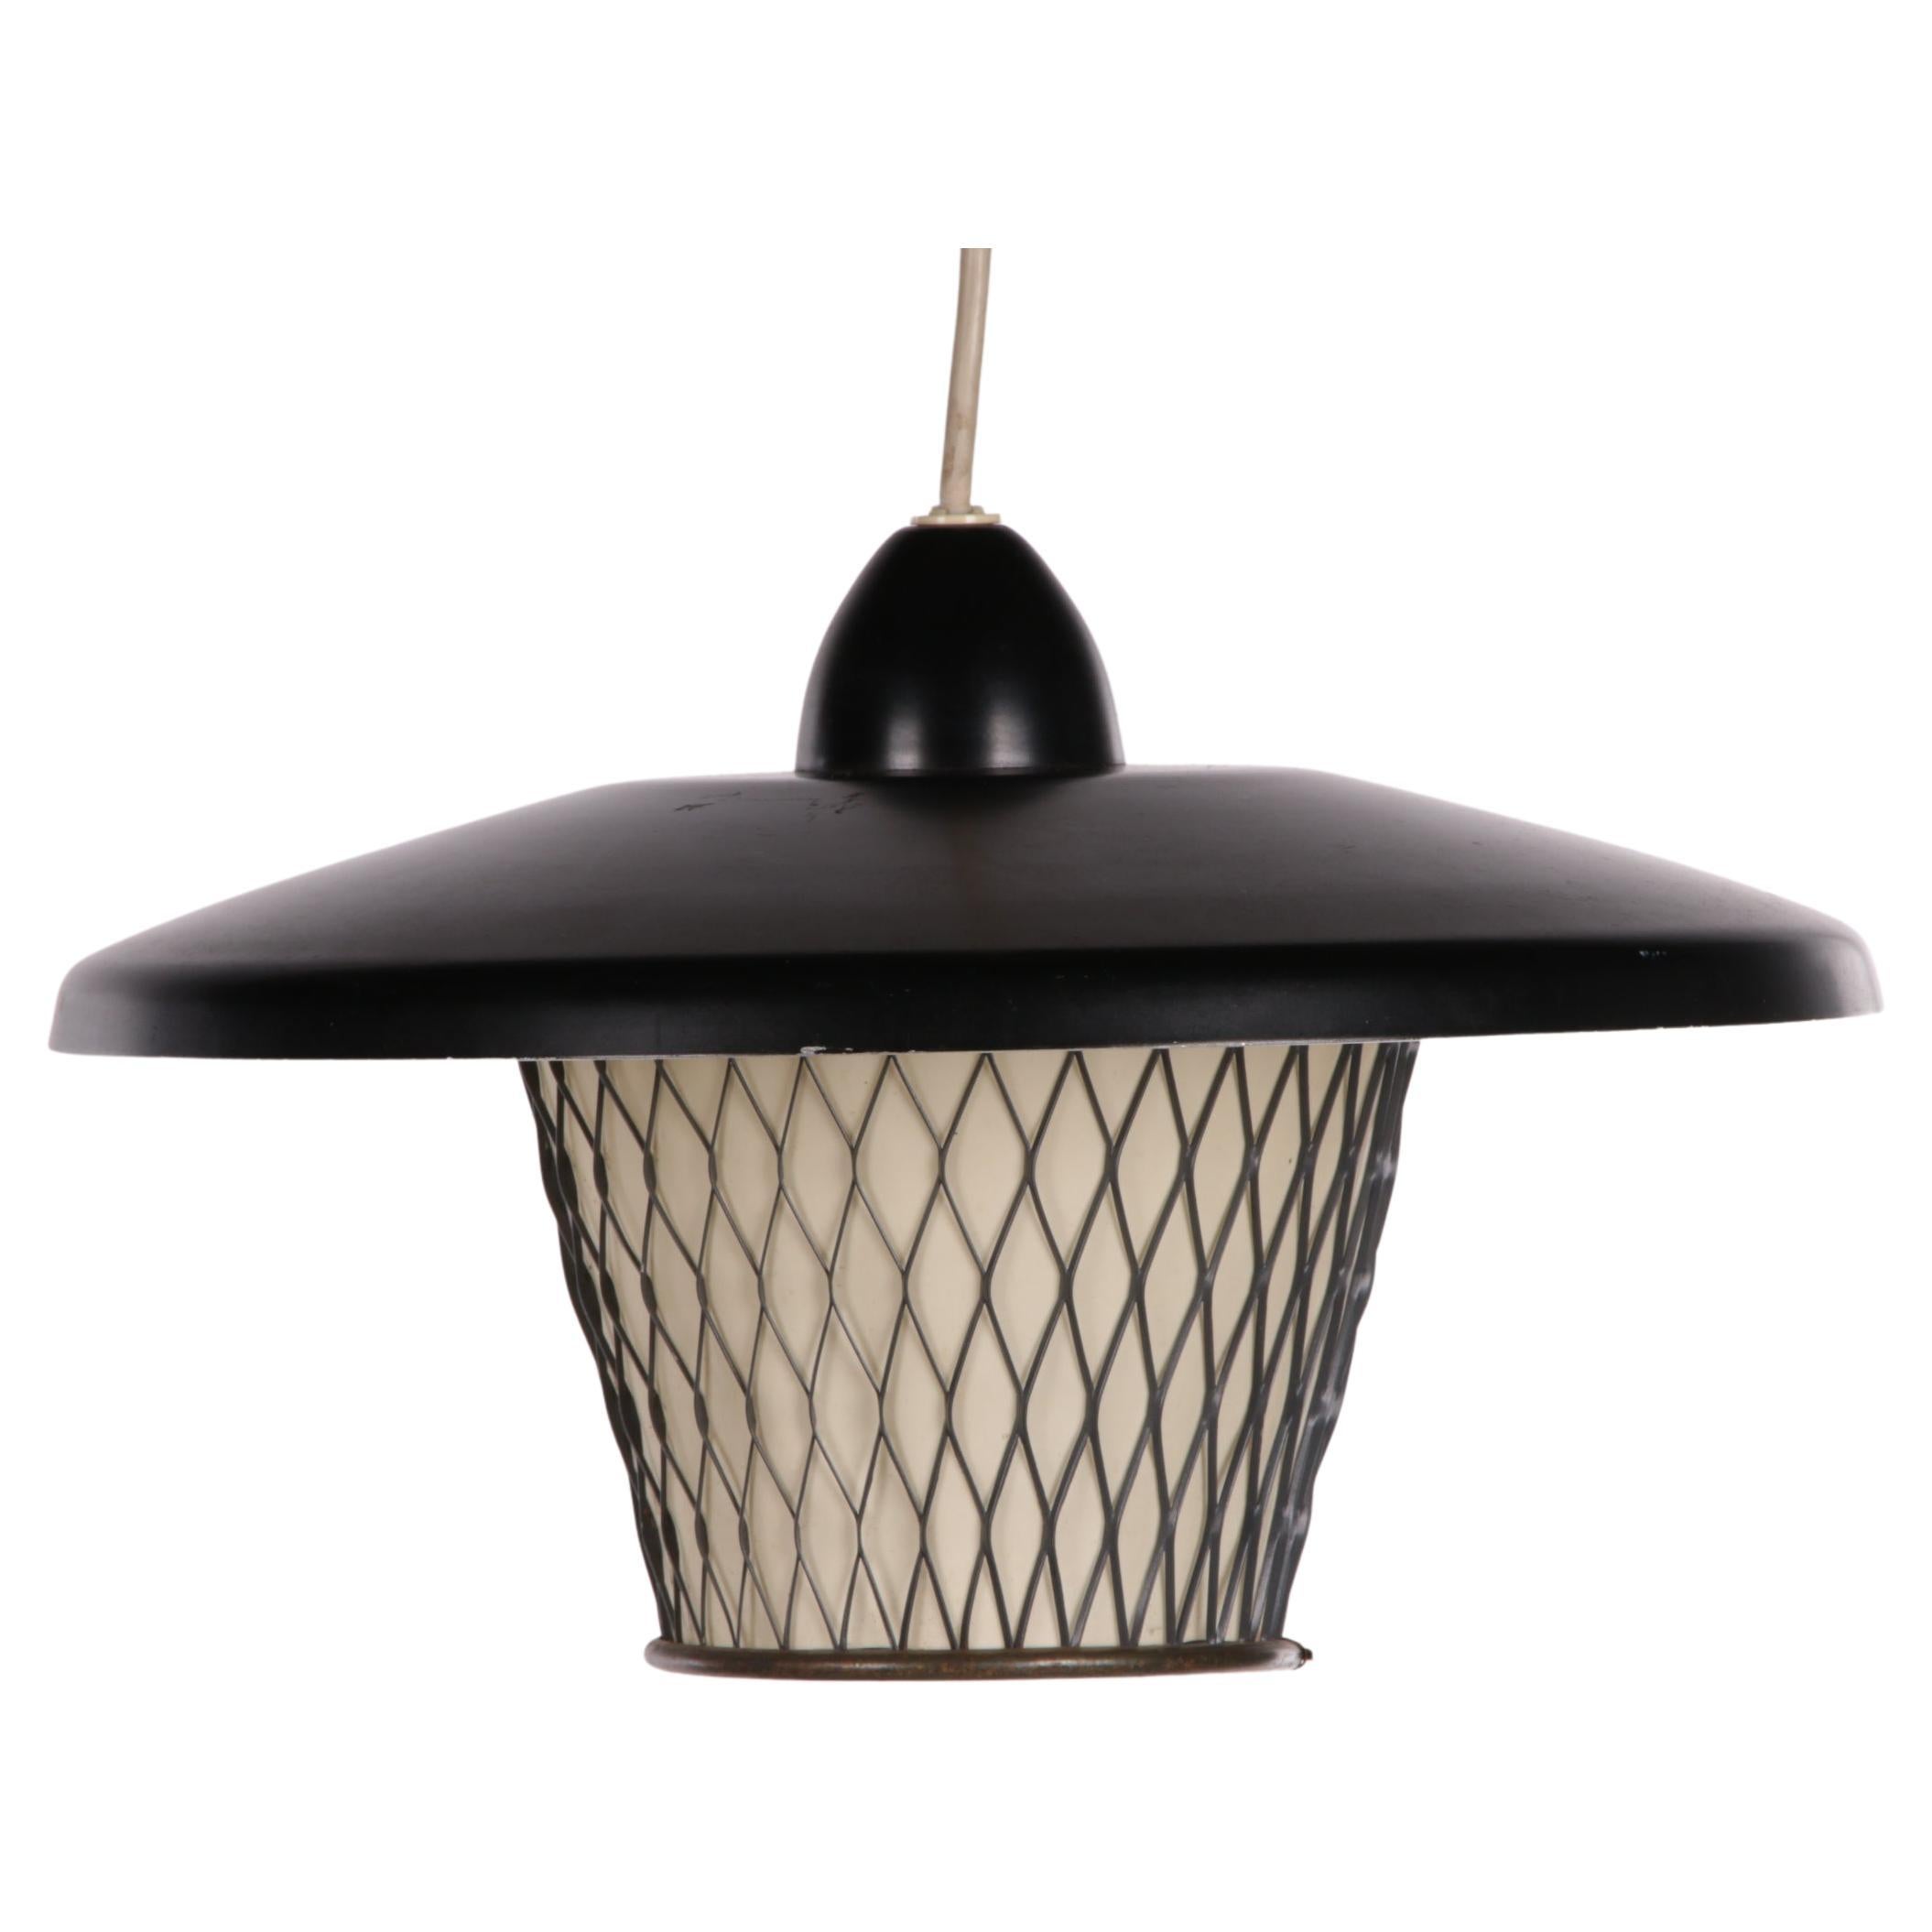 Vintage Hanging Lamp Comes from Scandinavia, Made in the 1960s